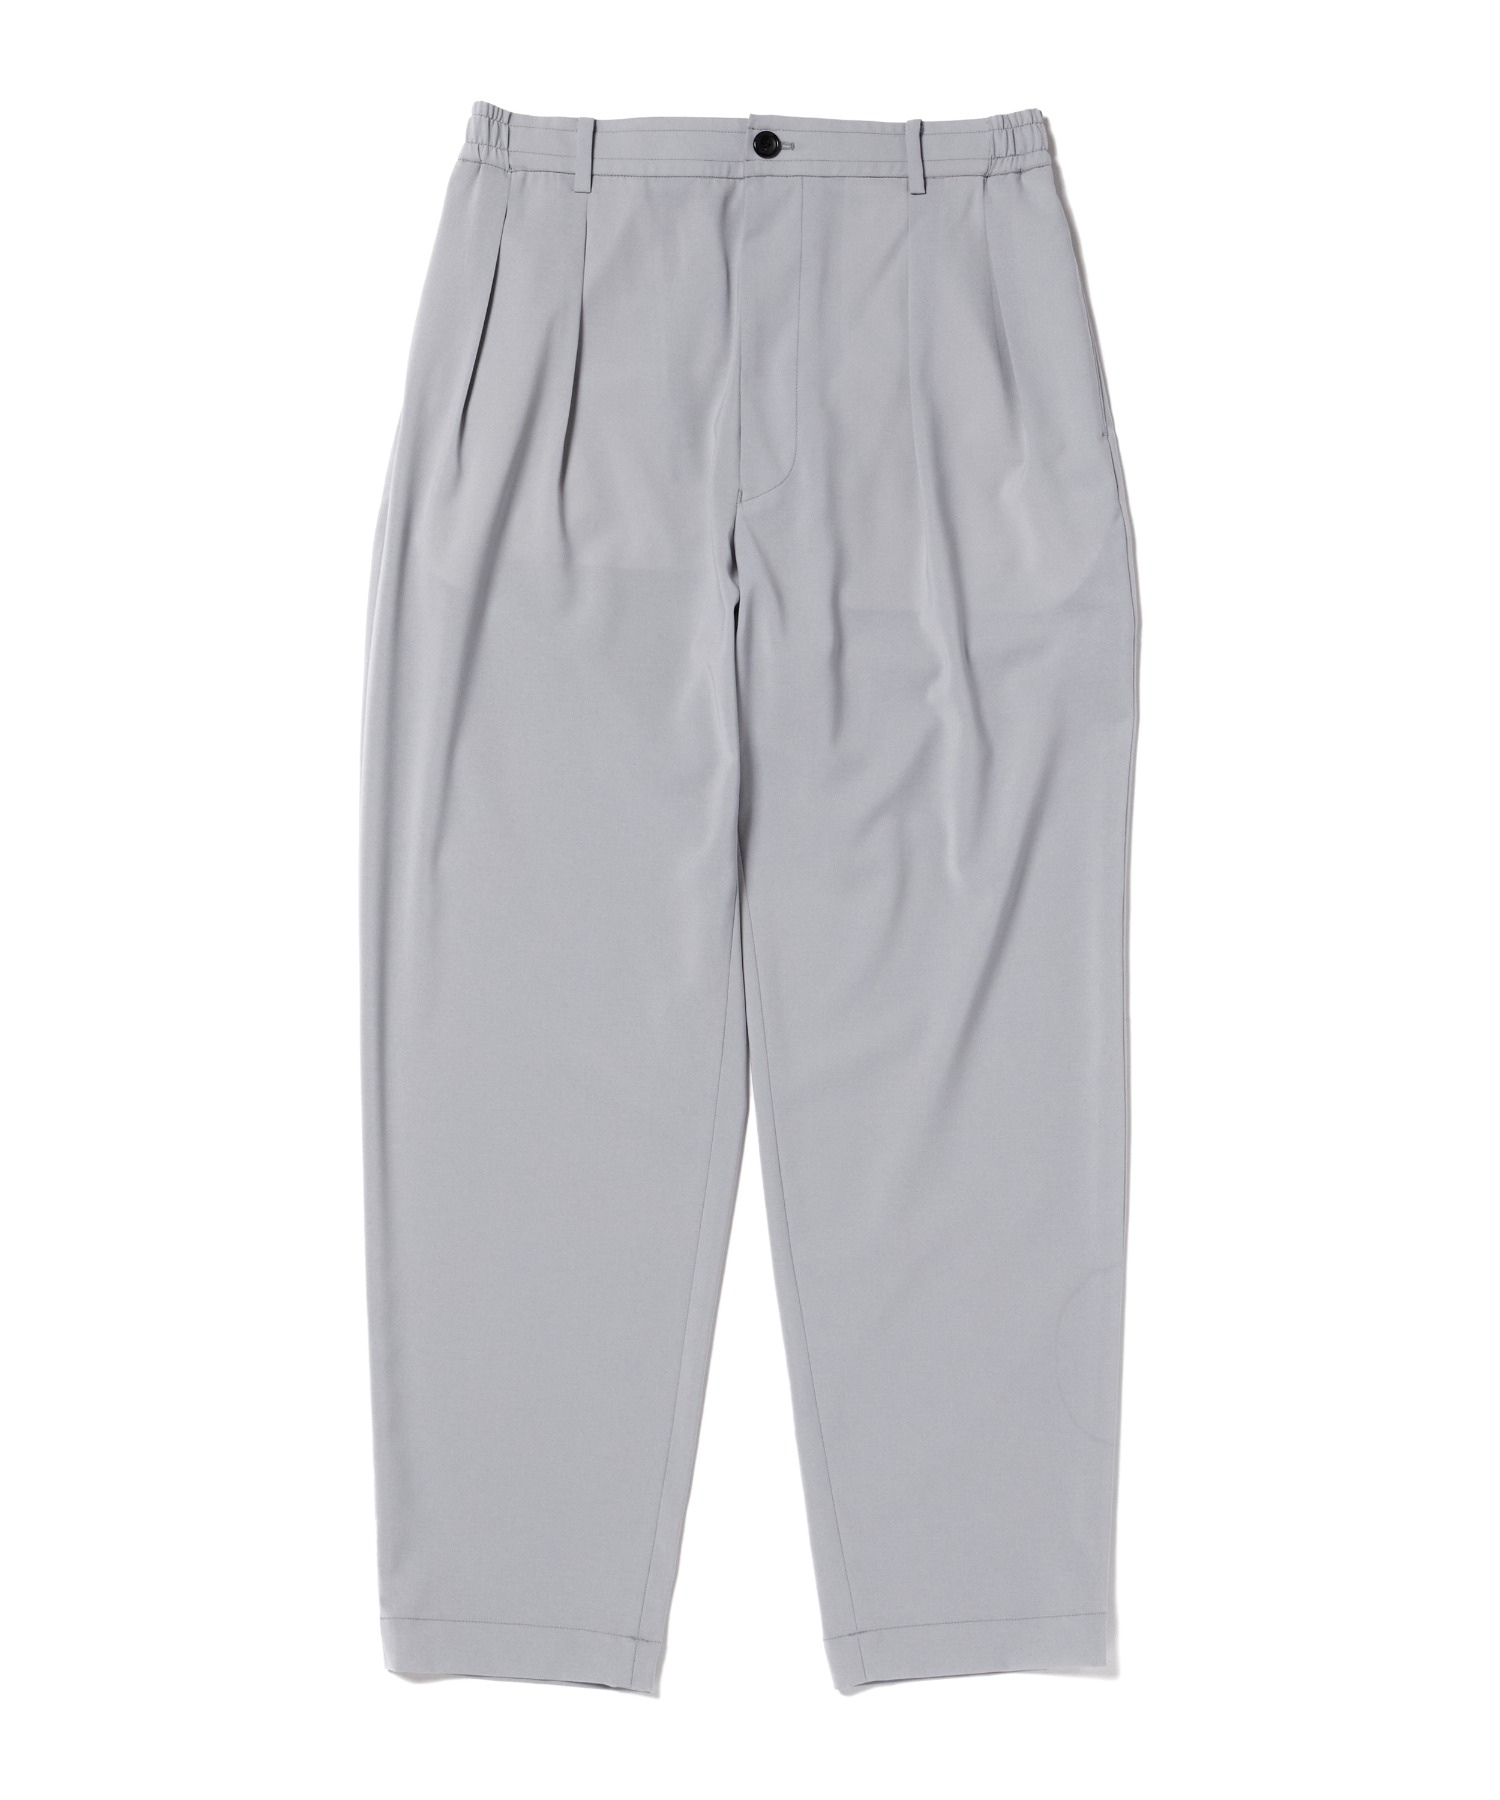 2TUCK TROUSERS